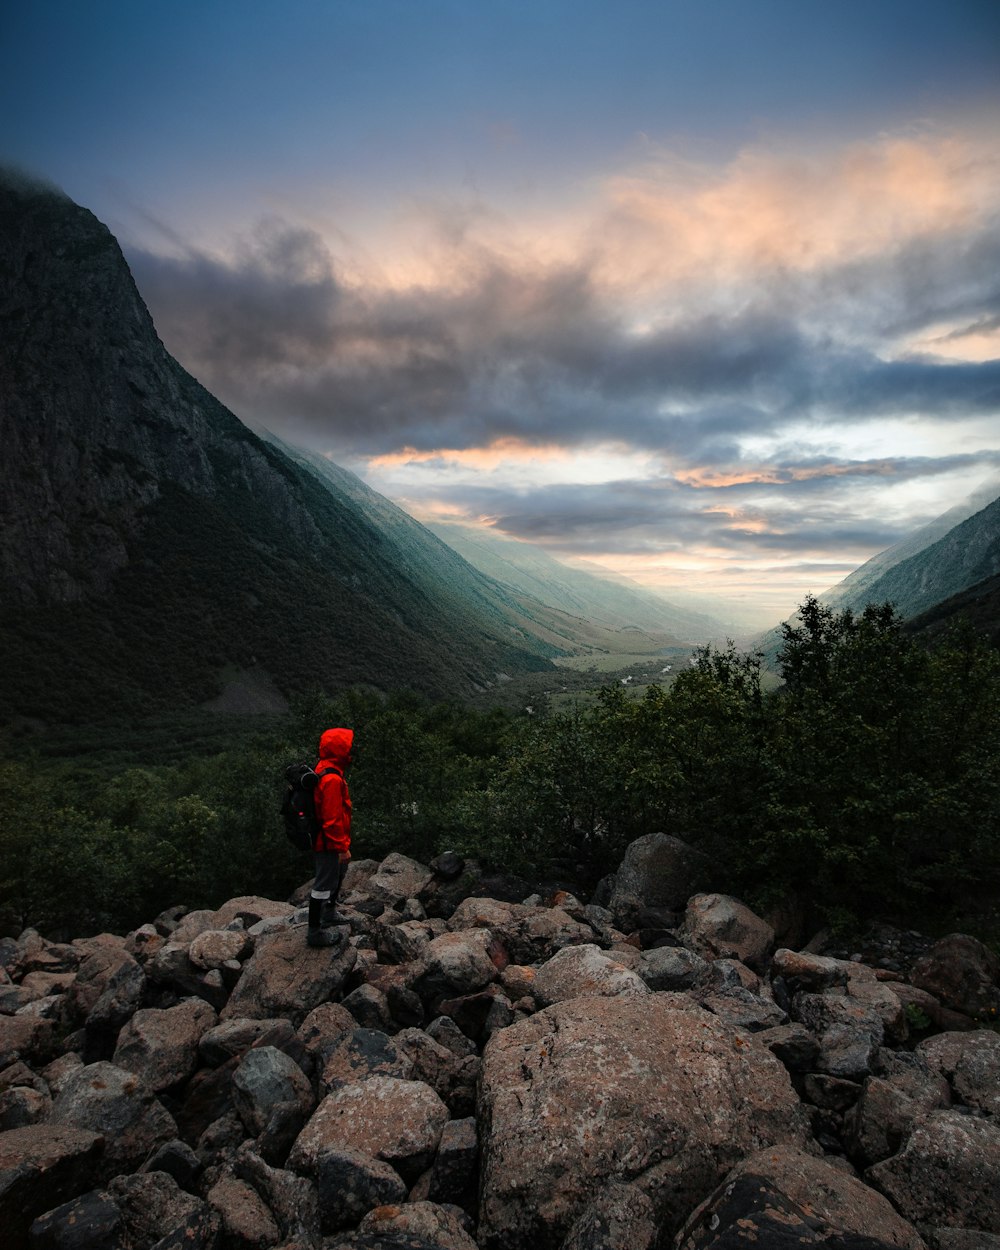 person in red jacket standing on rocky ground near green mountains under white cloudy sky during